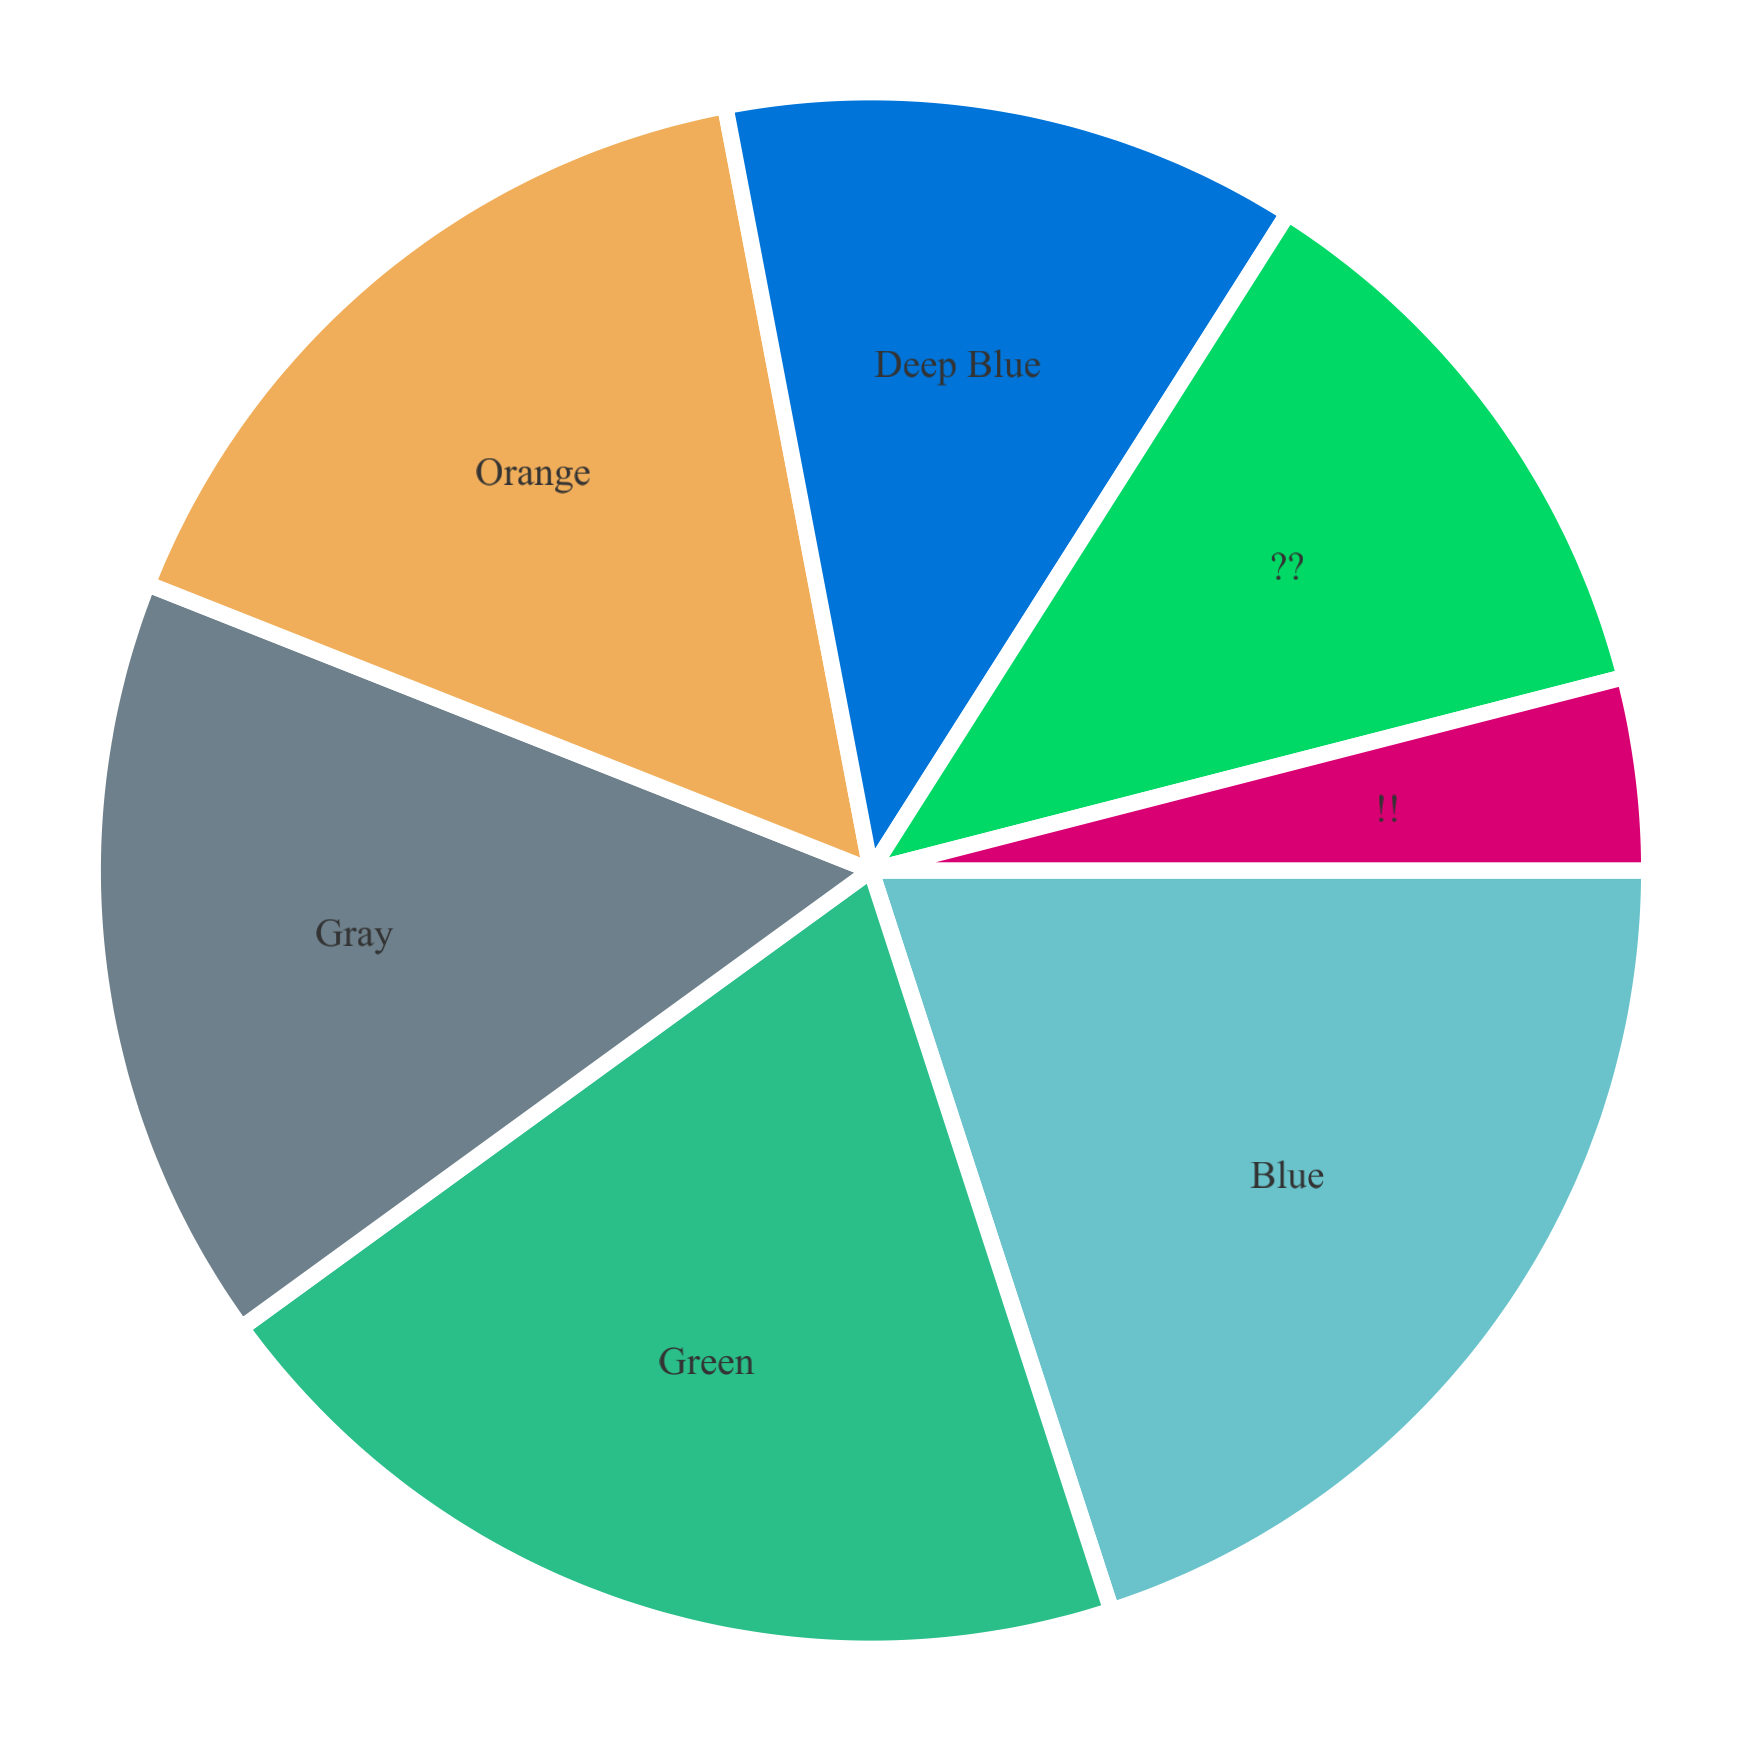 Sample pie chart output